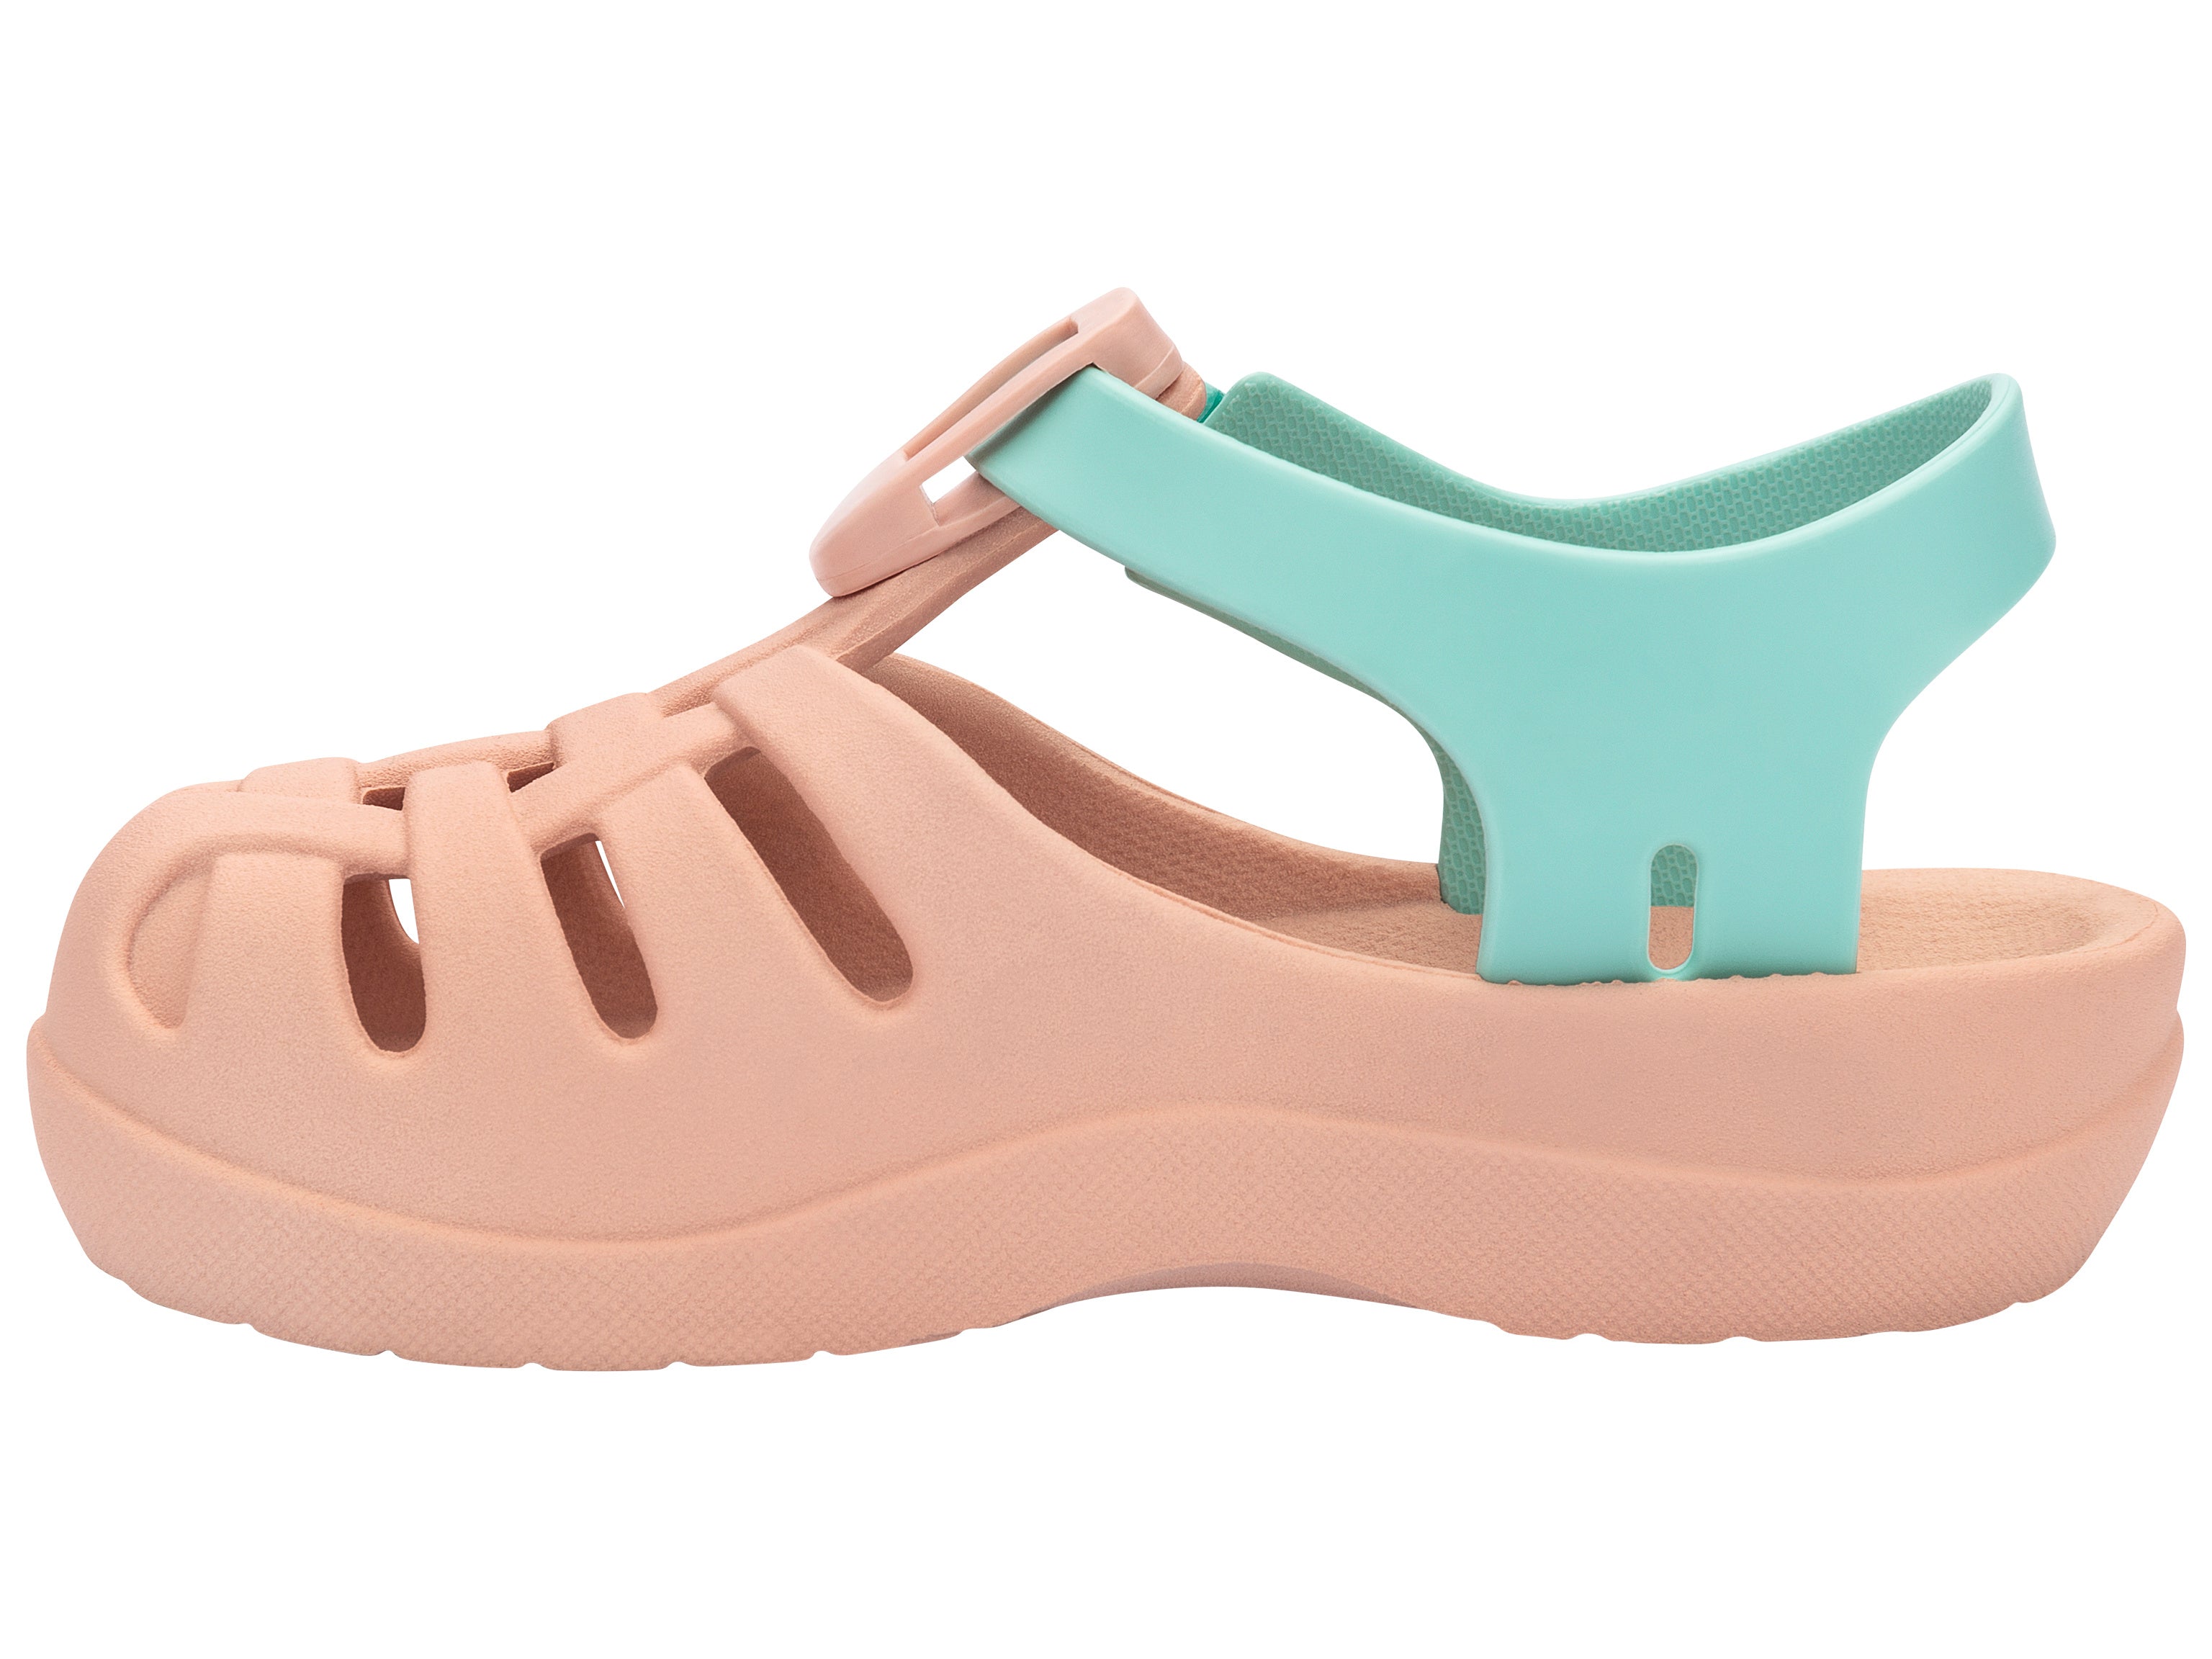 Inner side view of a beige Ipanema Summer Basic baby sandal with green strap.